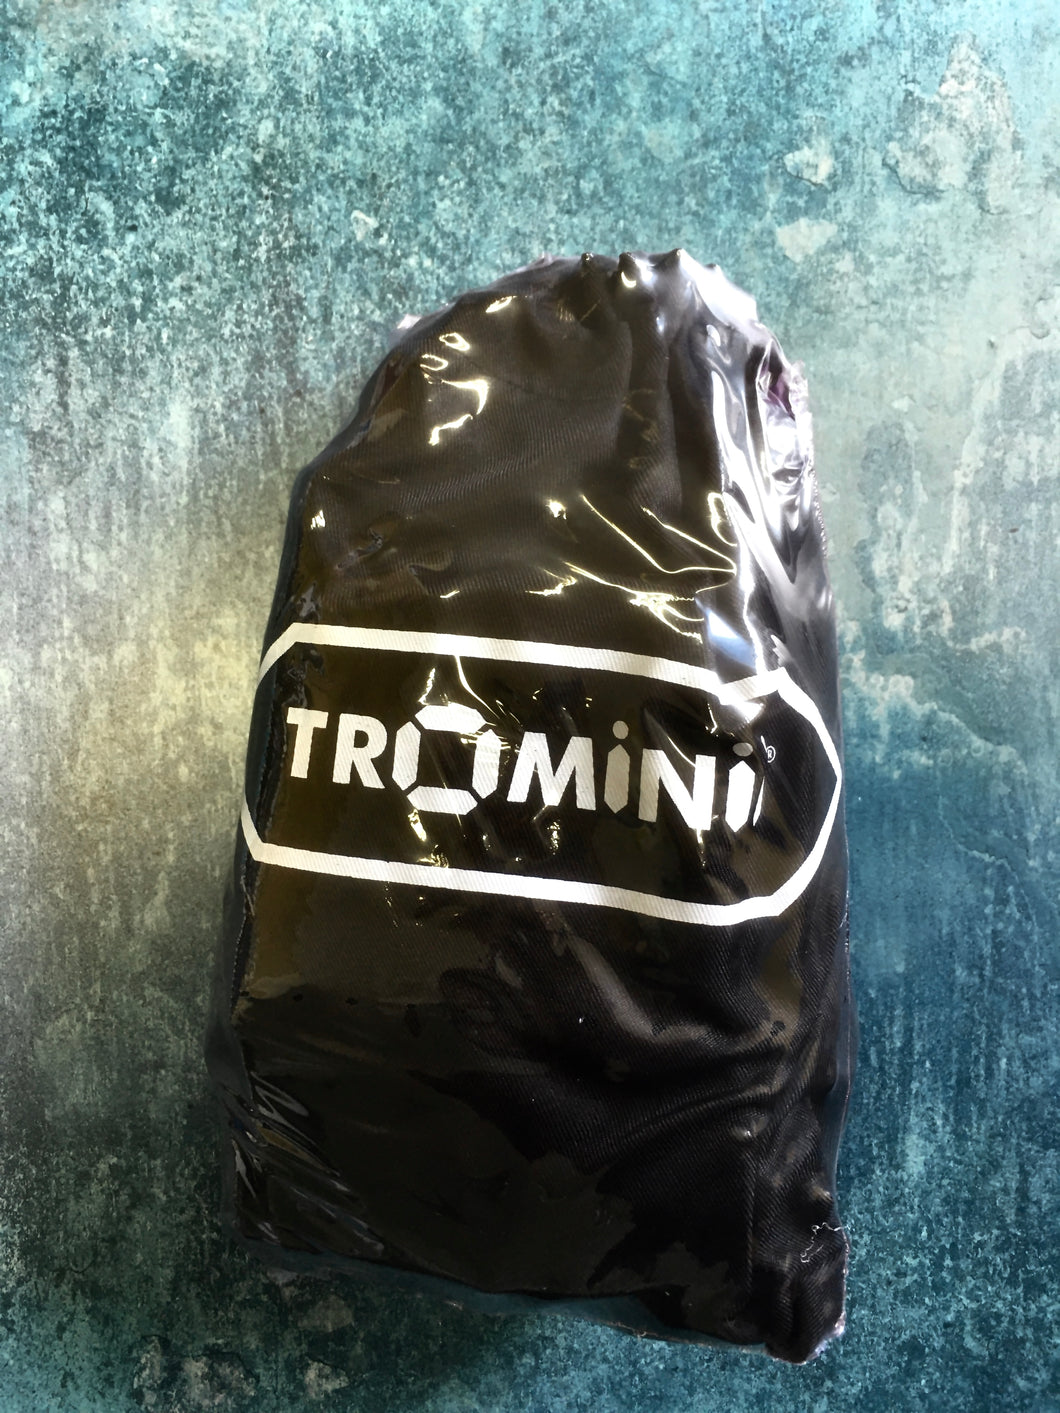 Trominii in the Bag only.